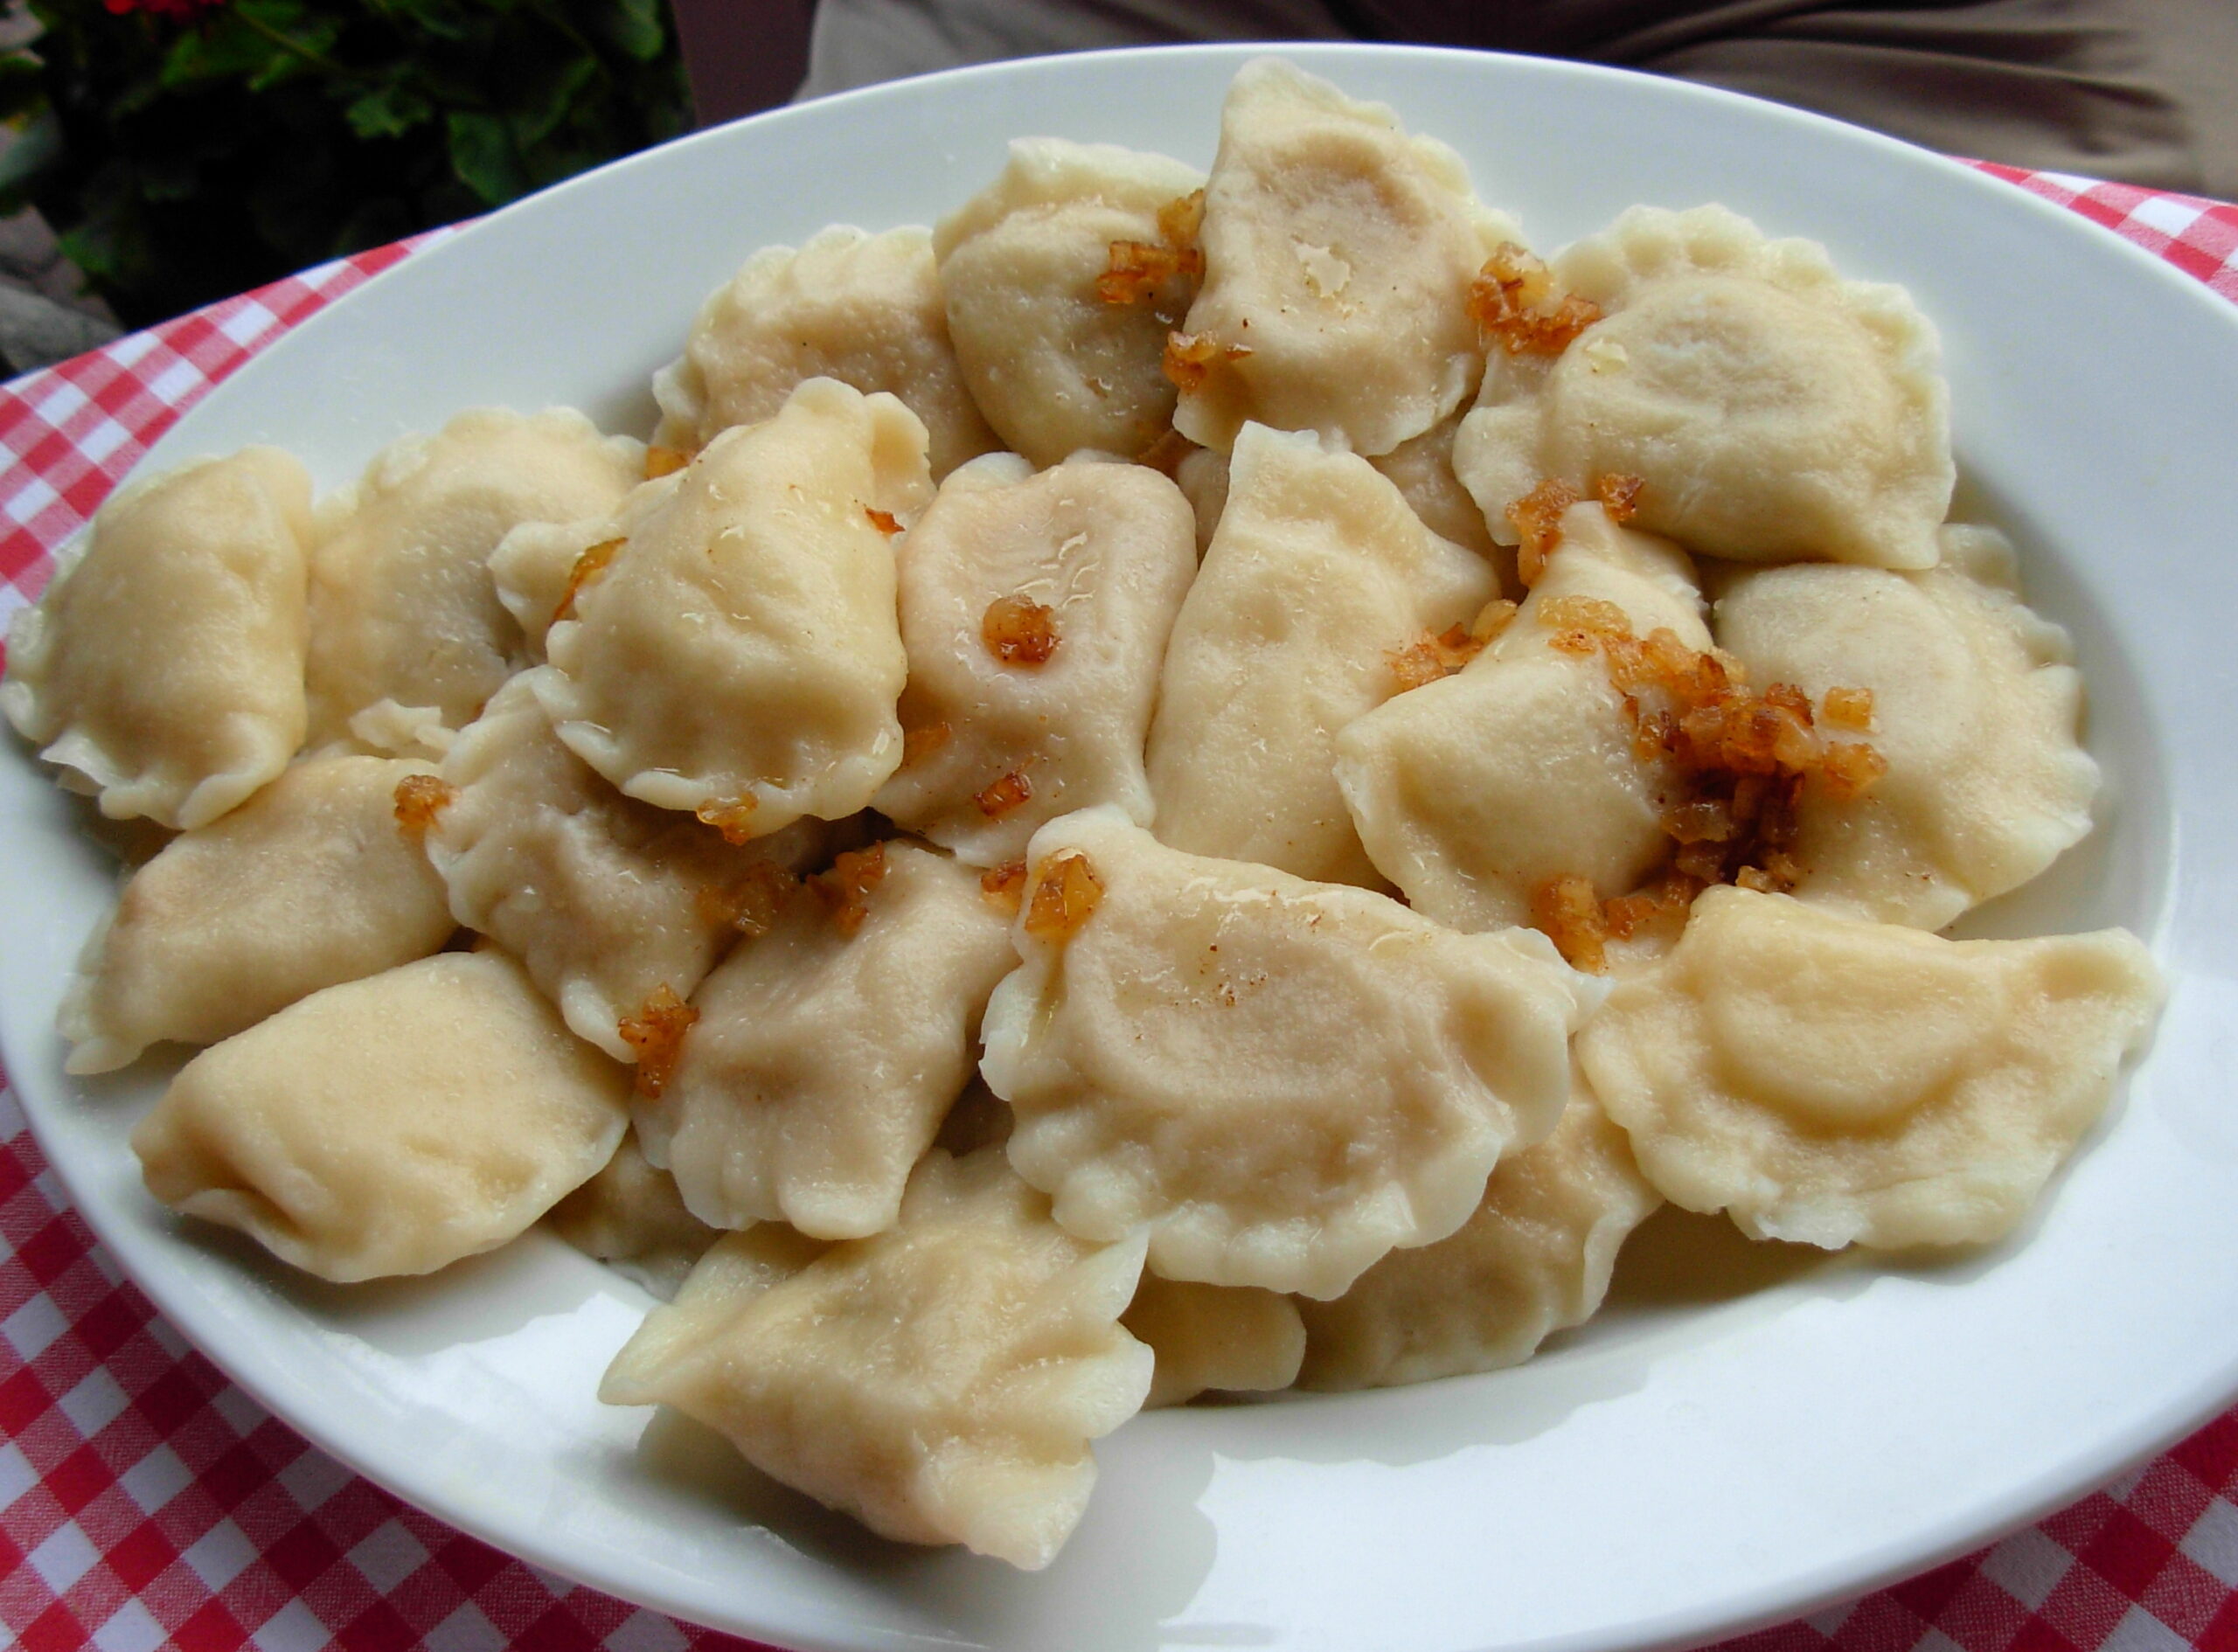 What Are Pierogies?